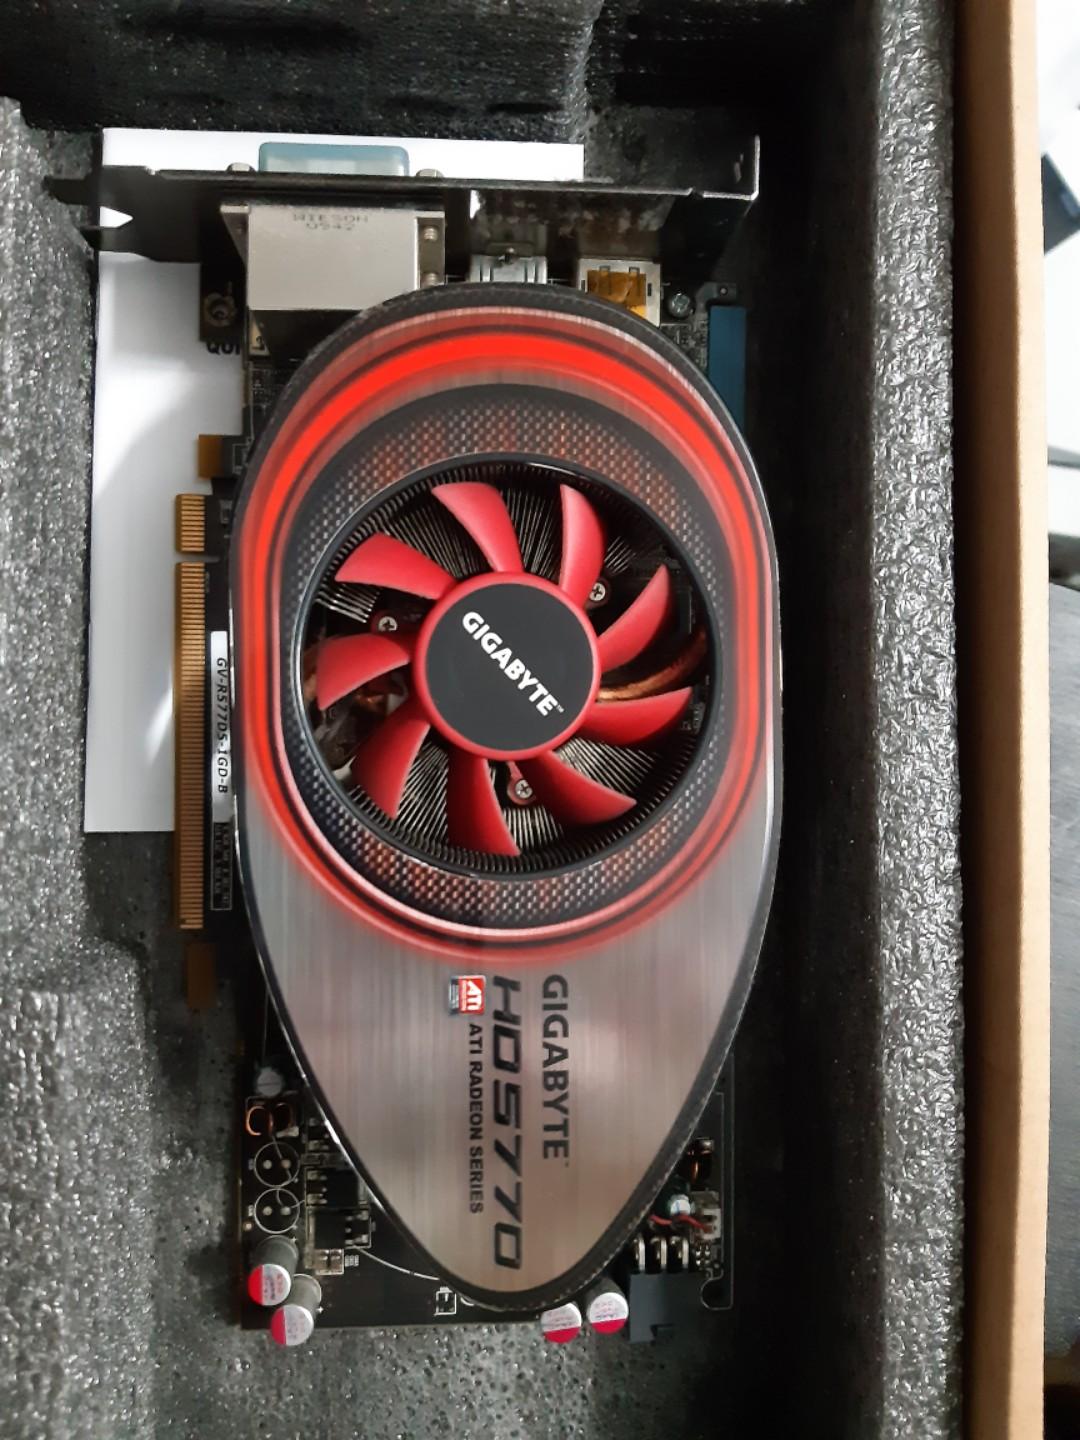 Gigabyte Hd5770 Ati Radeon 1gb Ddr5 Electronics Computer Parts Accessories On Carousell